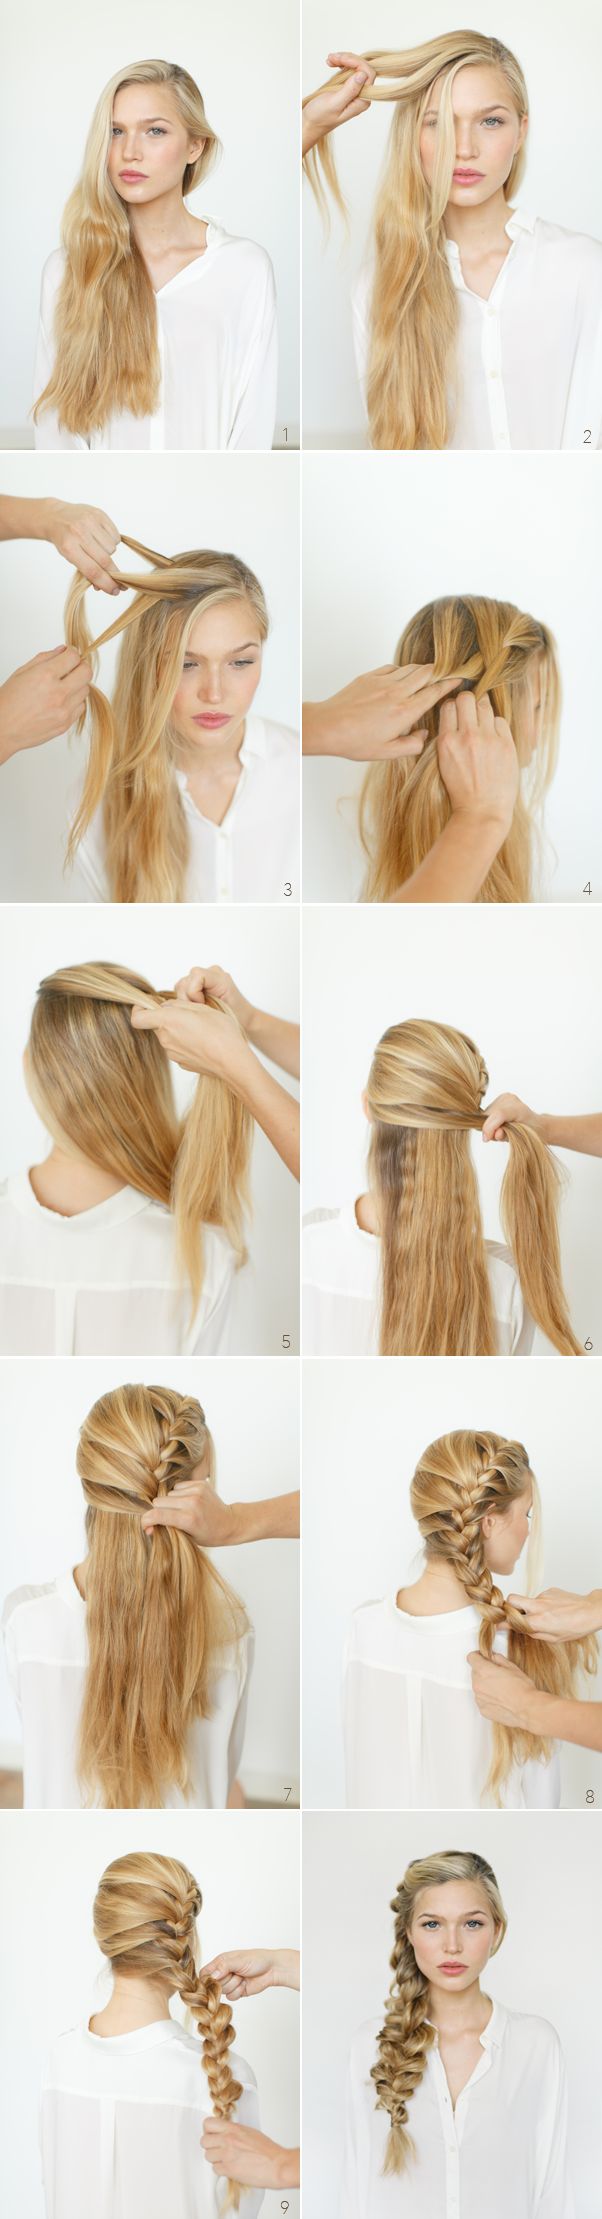 17 Romantic Hairstyle Ideas and Tutorials for the Aphrodite cabin | For More Gre...